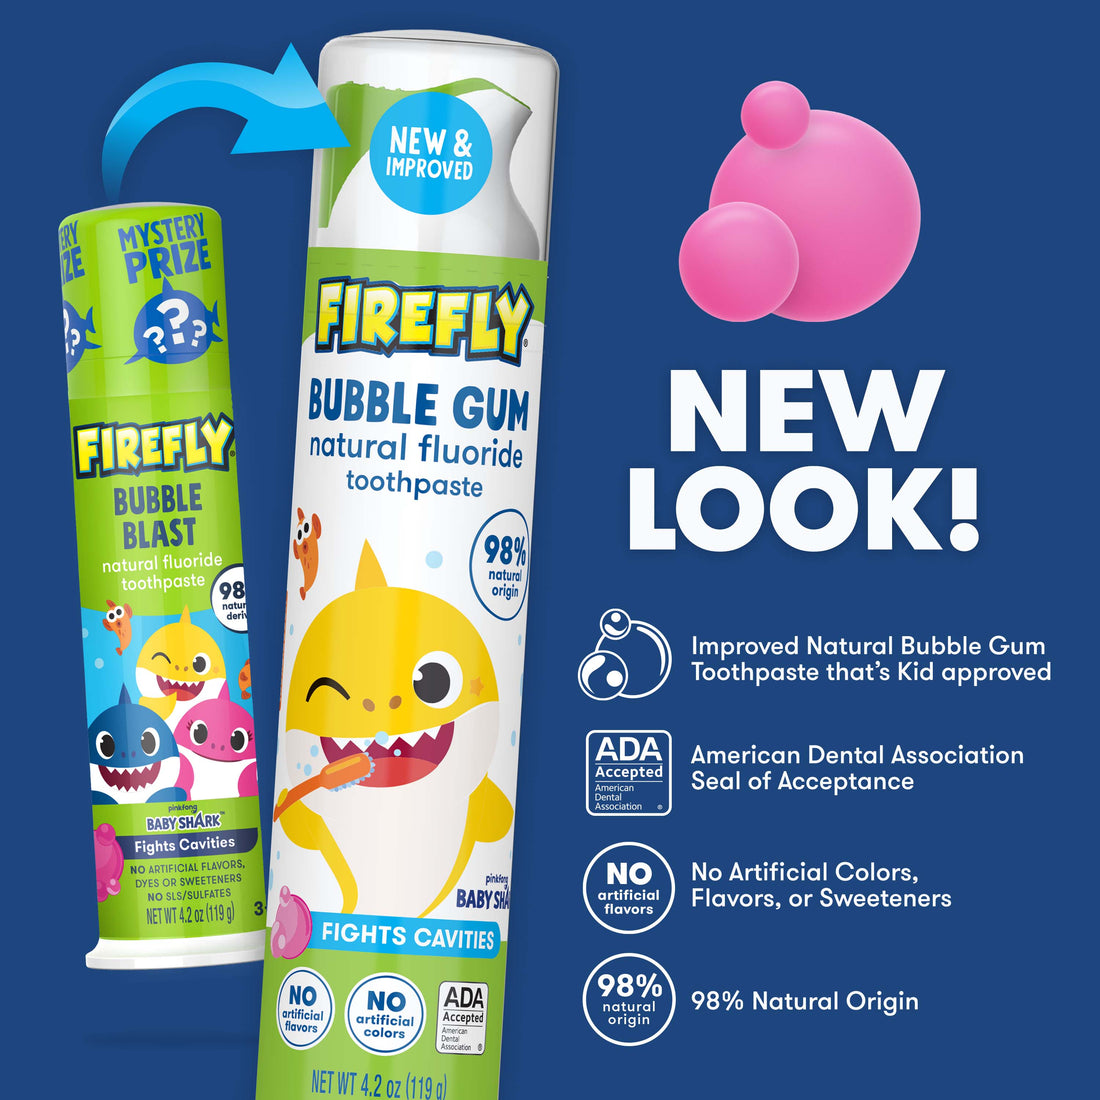 Baby Shark Anti-Cavity Natural Fluoride Toothpaste, Bubble Gum Flavor, white, New Look, Improved Natural Bubble Gum toothpaste that&